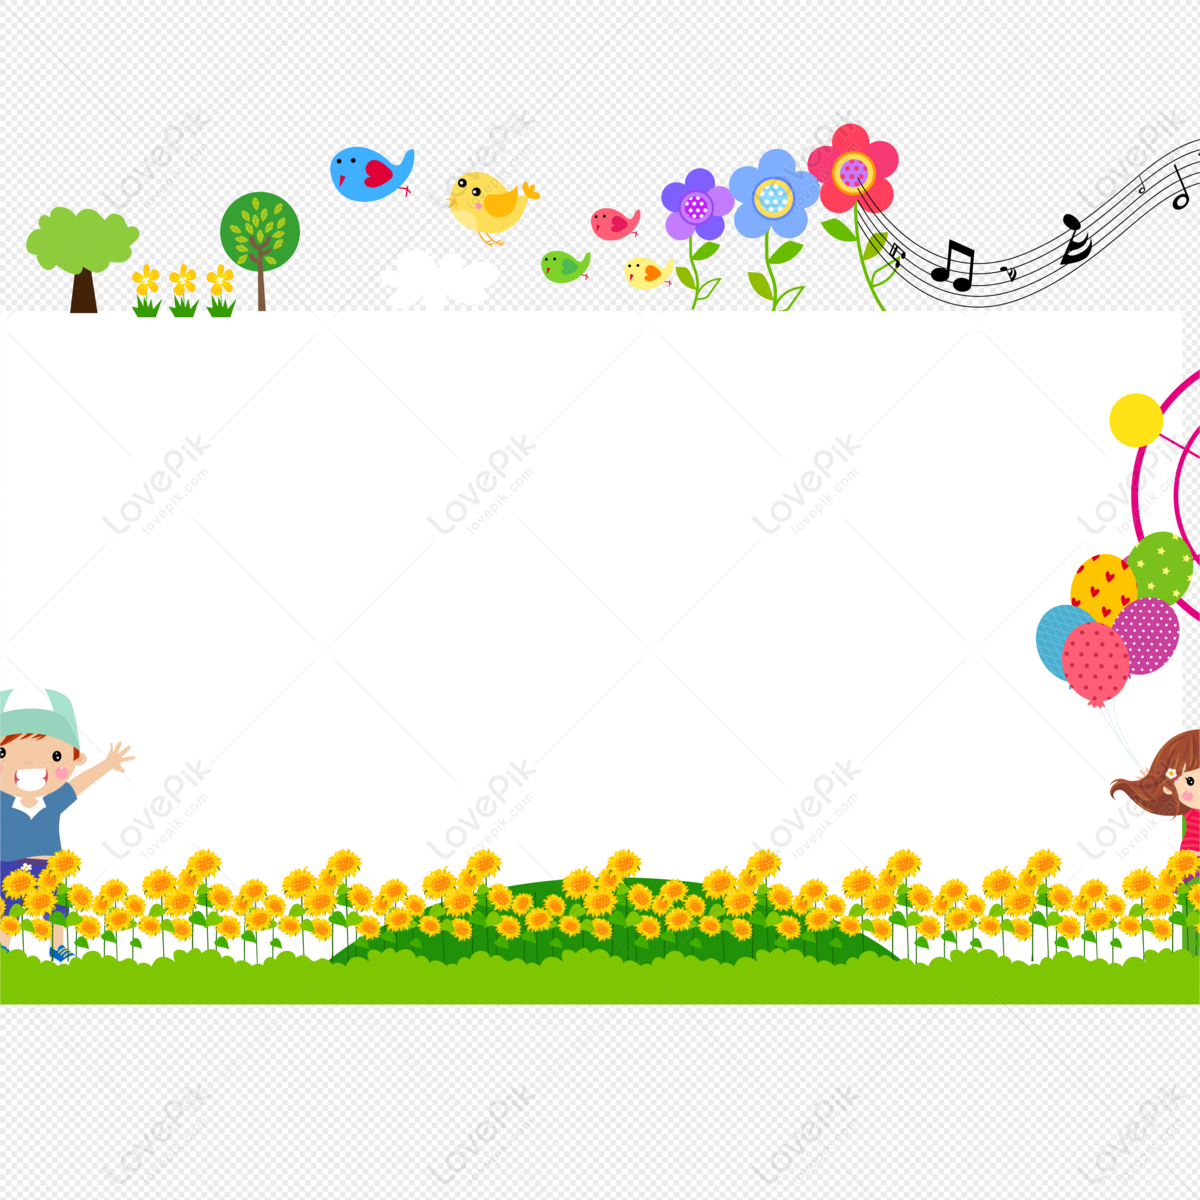 Childrens Festive Border PNG Transparent Background And Clipart Image For  Free Download - Lovepik | 401422790